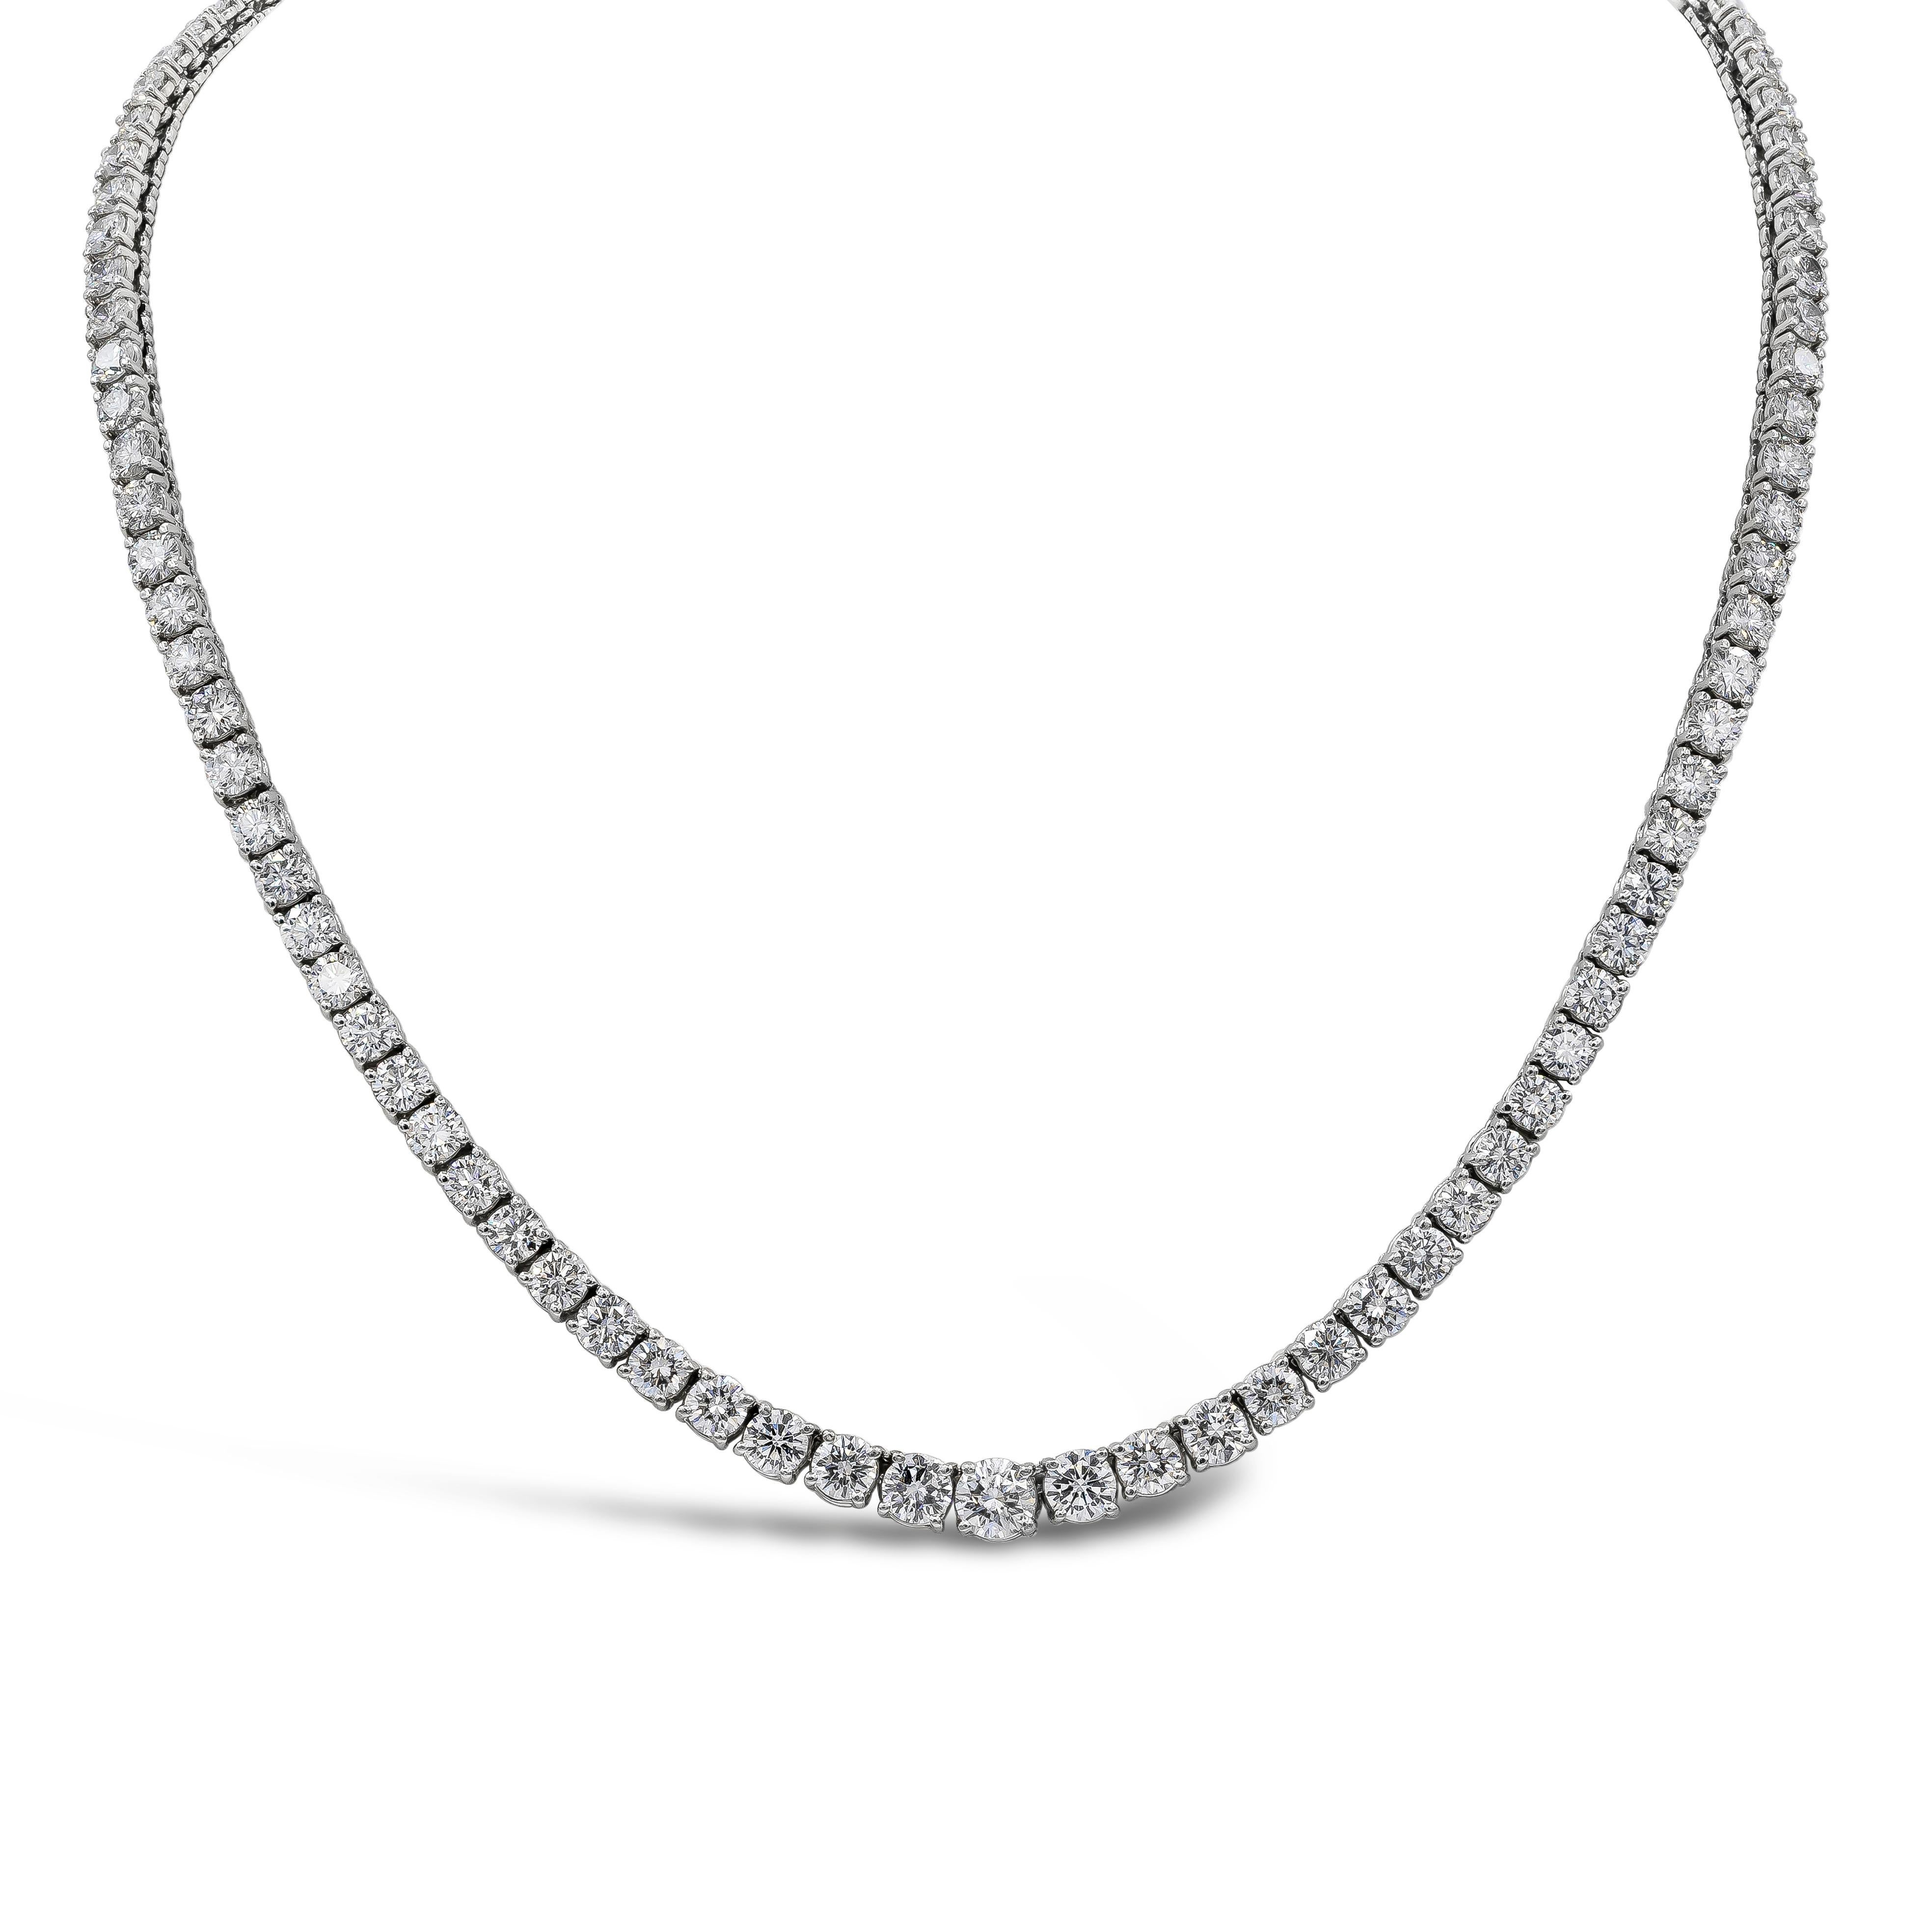 A simple yet very brilliant piece showcasing round diamonds that elegantly graduate larger as it reaches the center of the necklace. Diamonds weigh 18.75 carats total and are very fine quality (approximately G color, VS+ quality). Made in platinum.